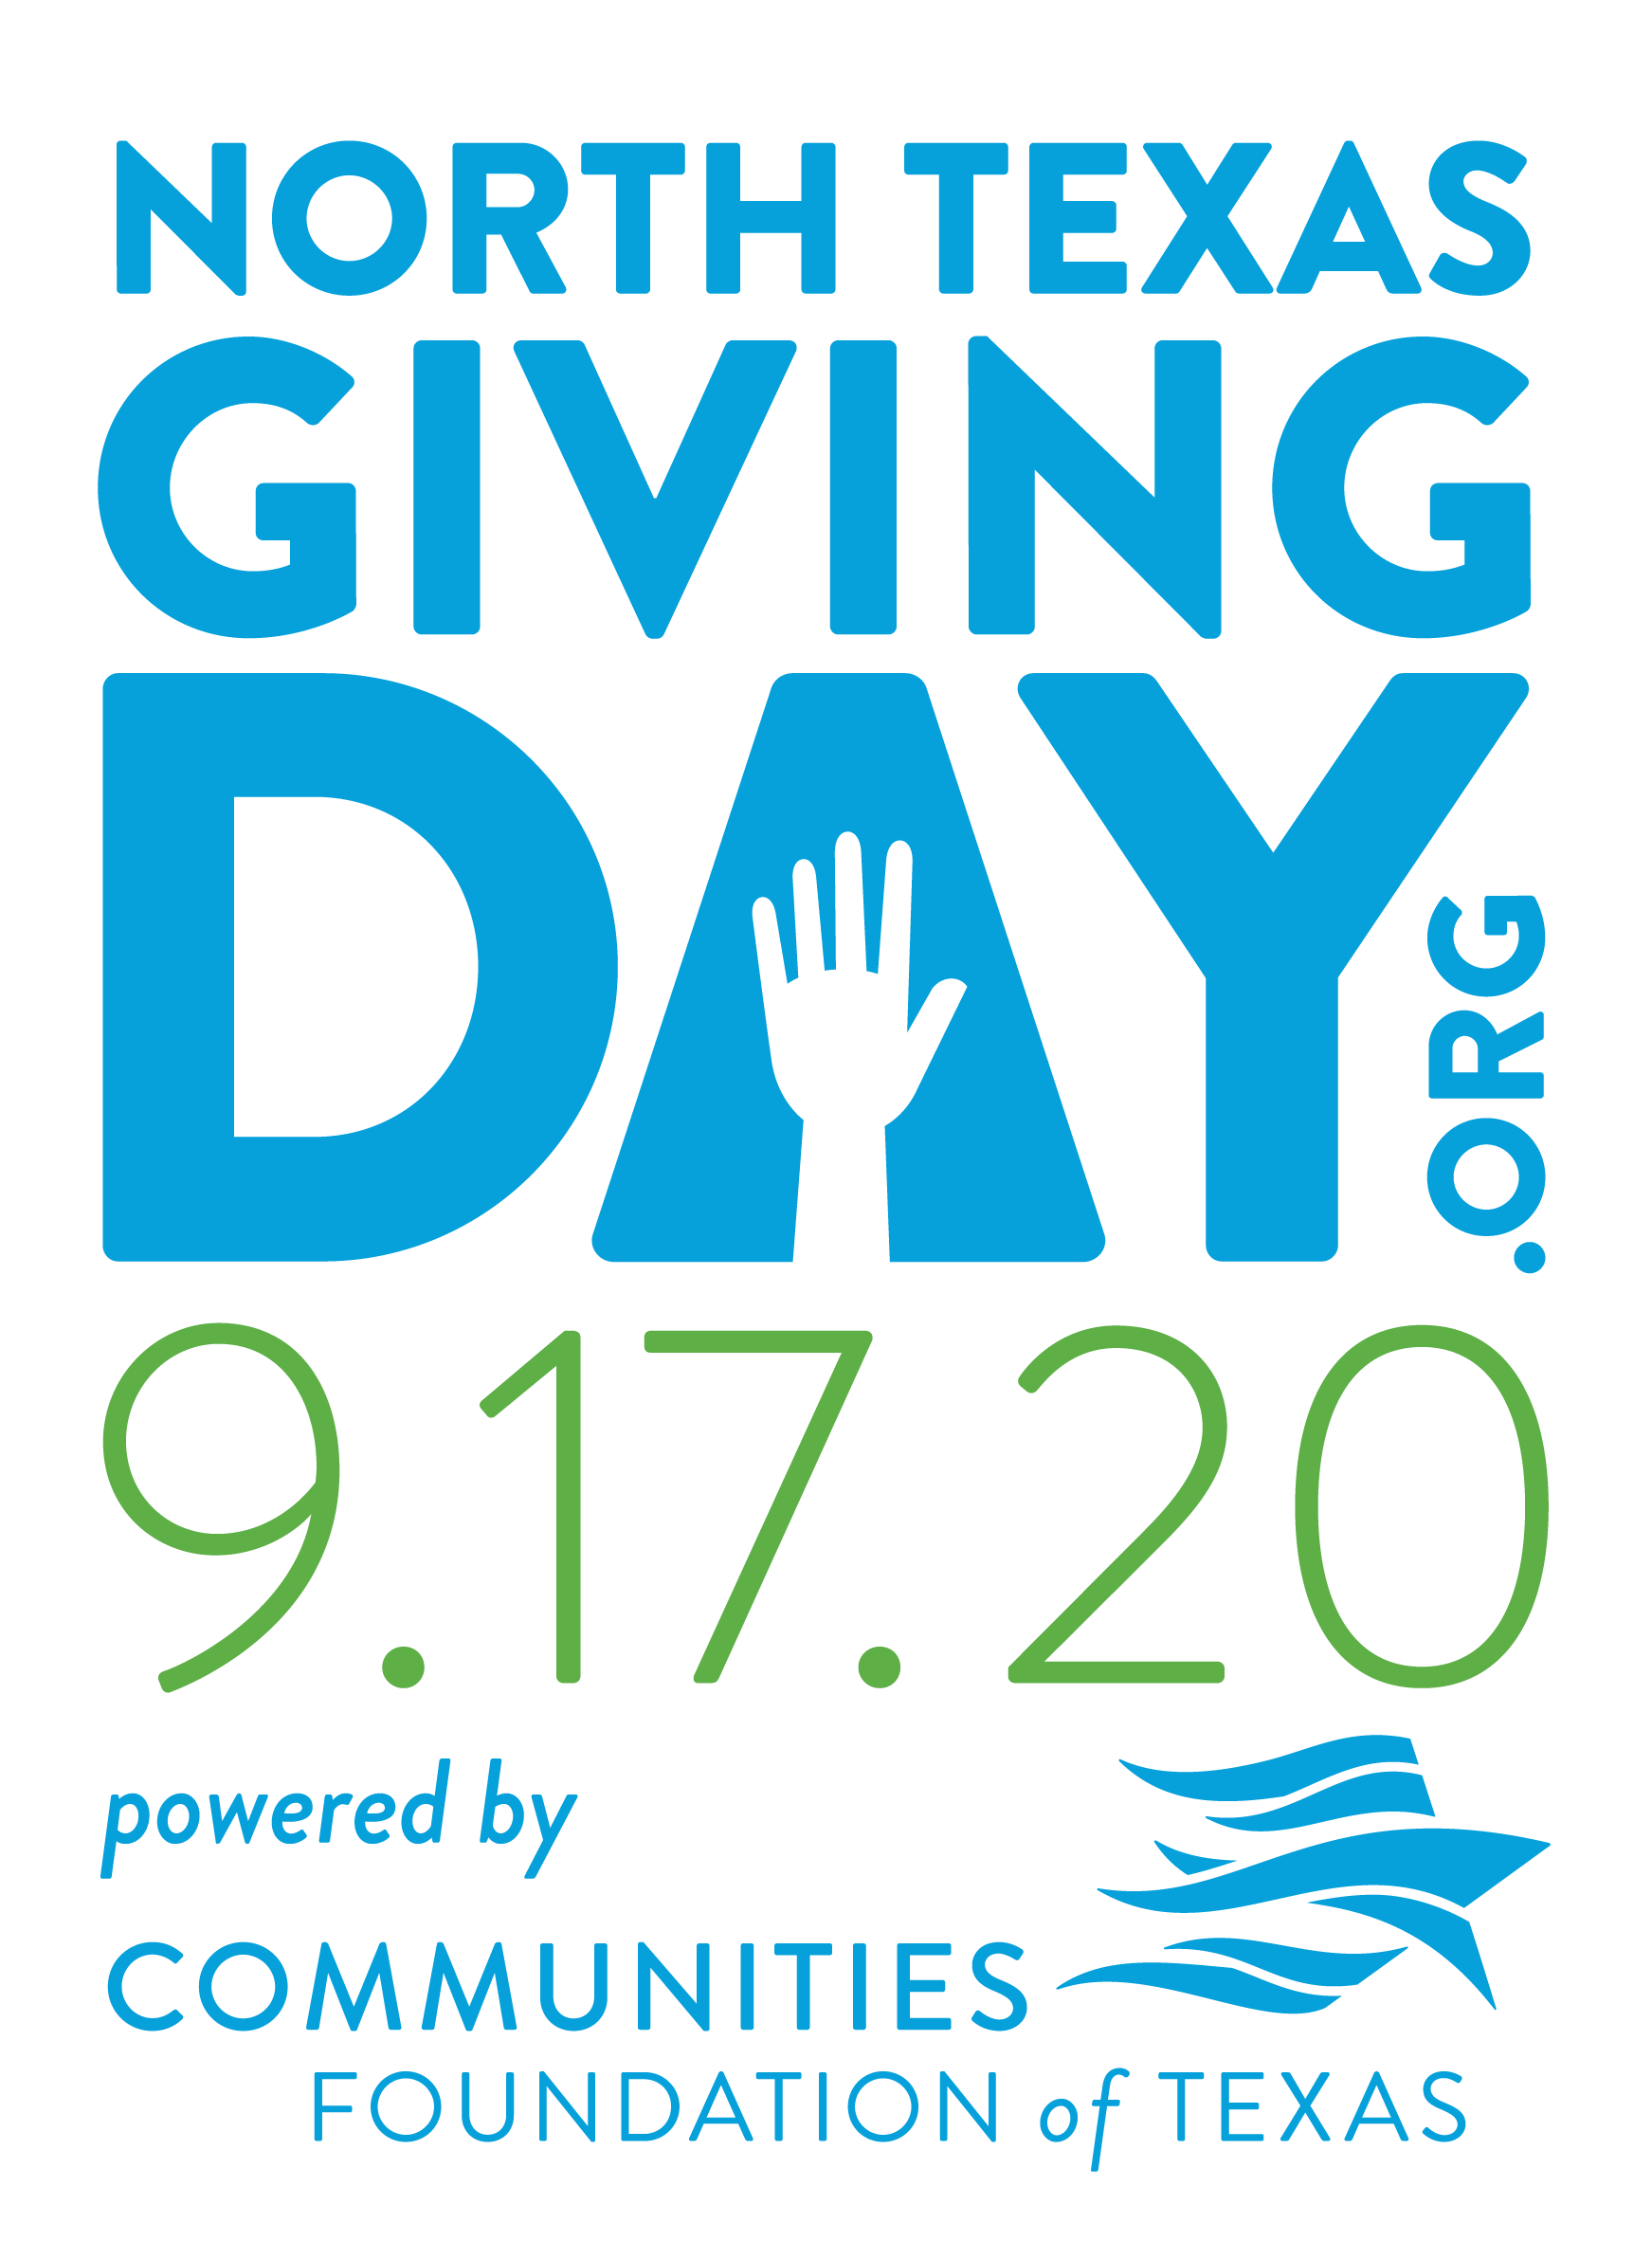 Support KCA and TTA through the 2020 North Texas Giving Day